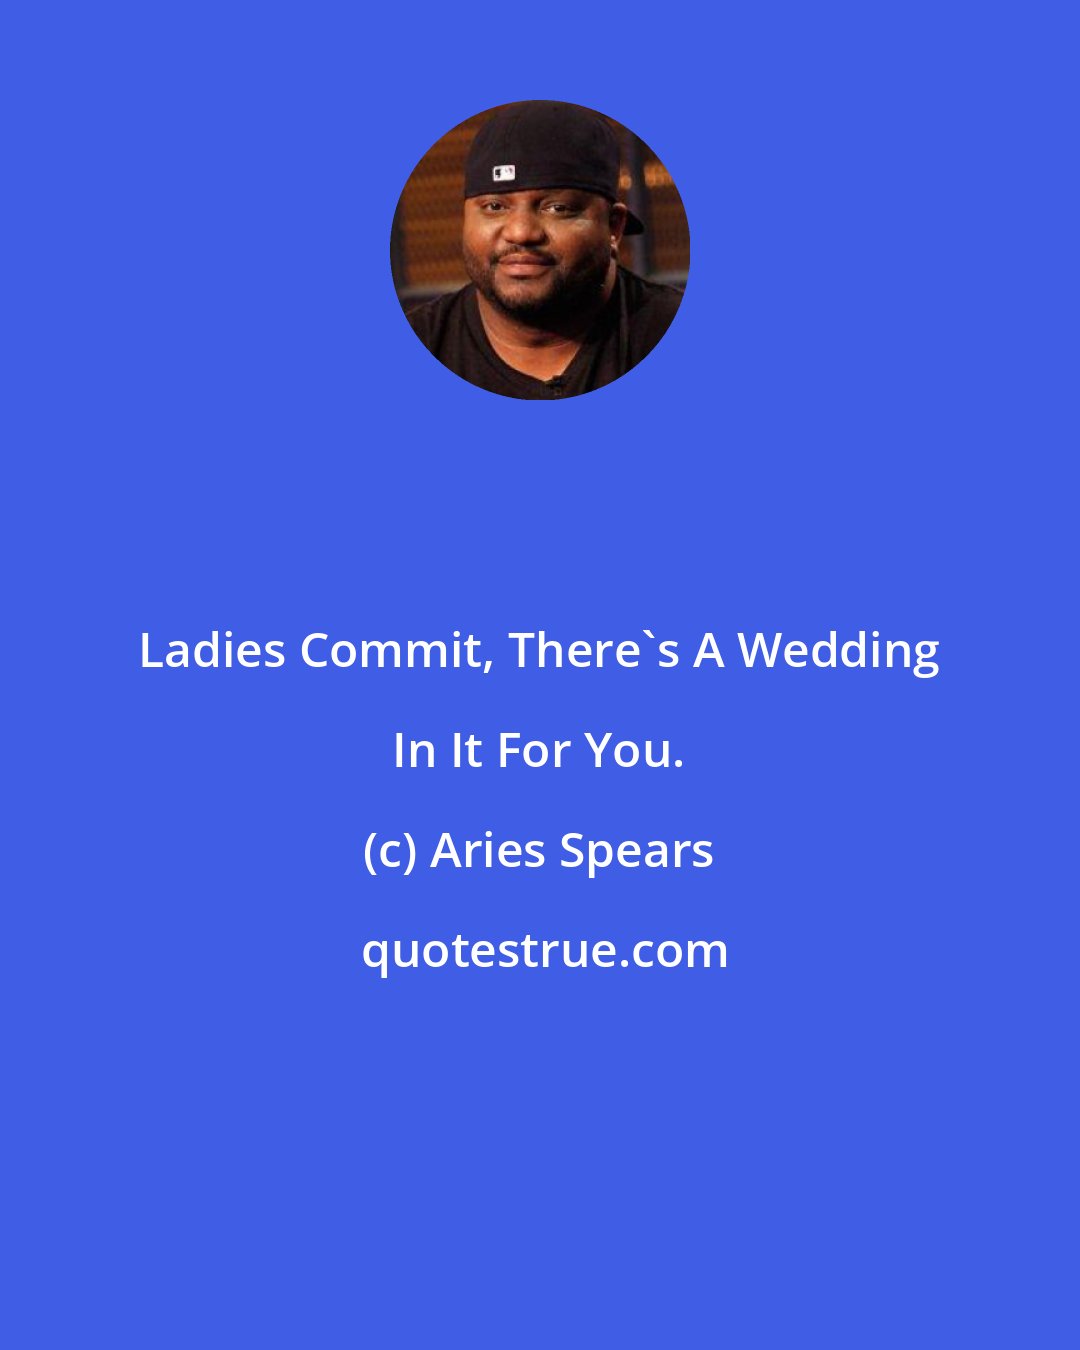 Aries Spears: Ladies Commit, There's A Wedding In It For You.